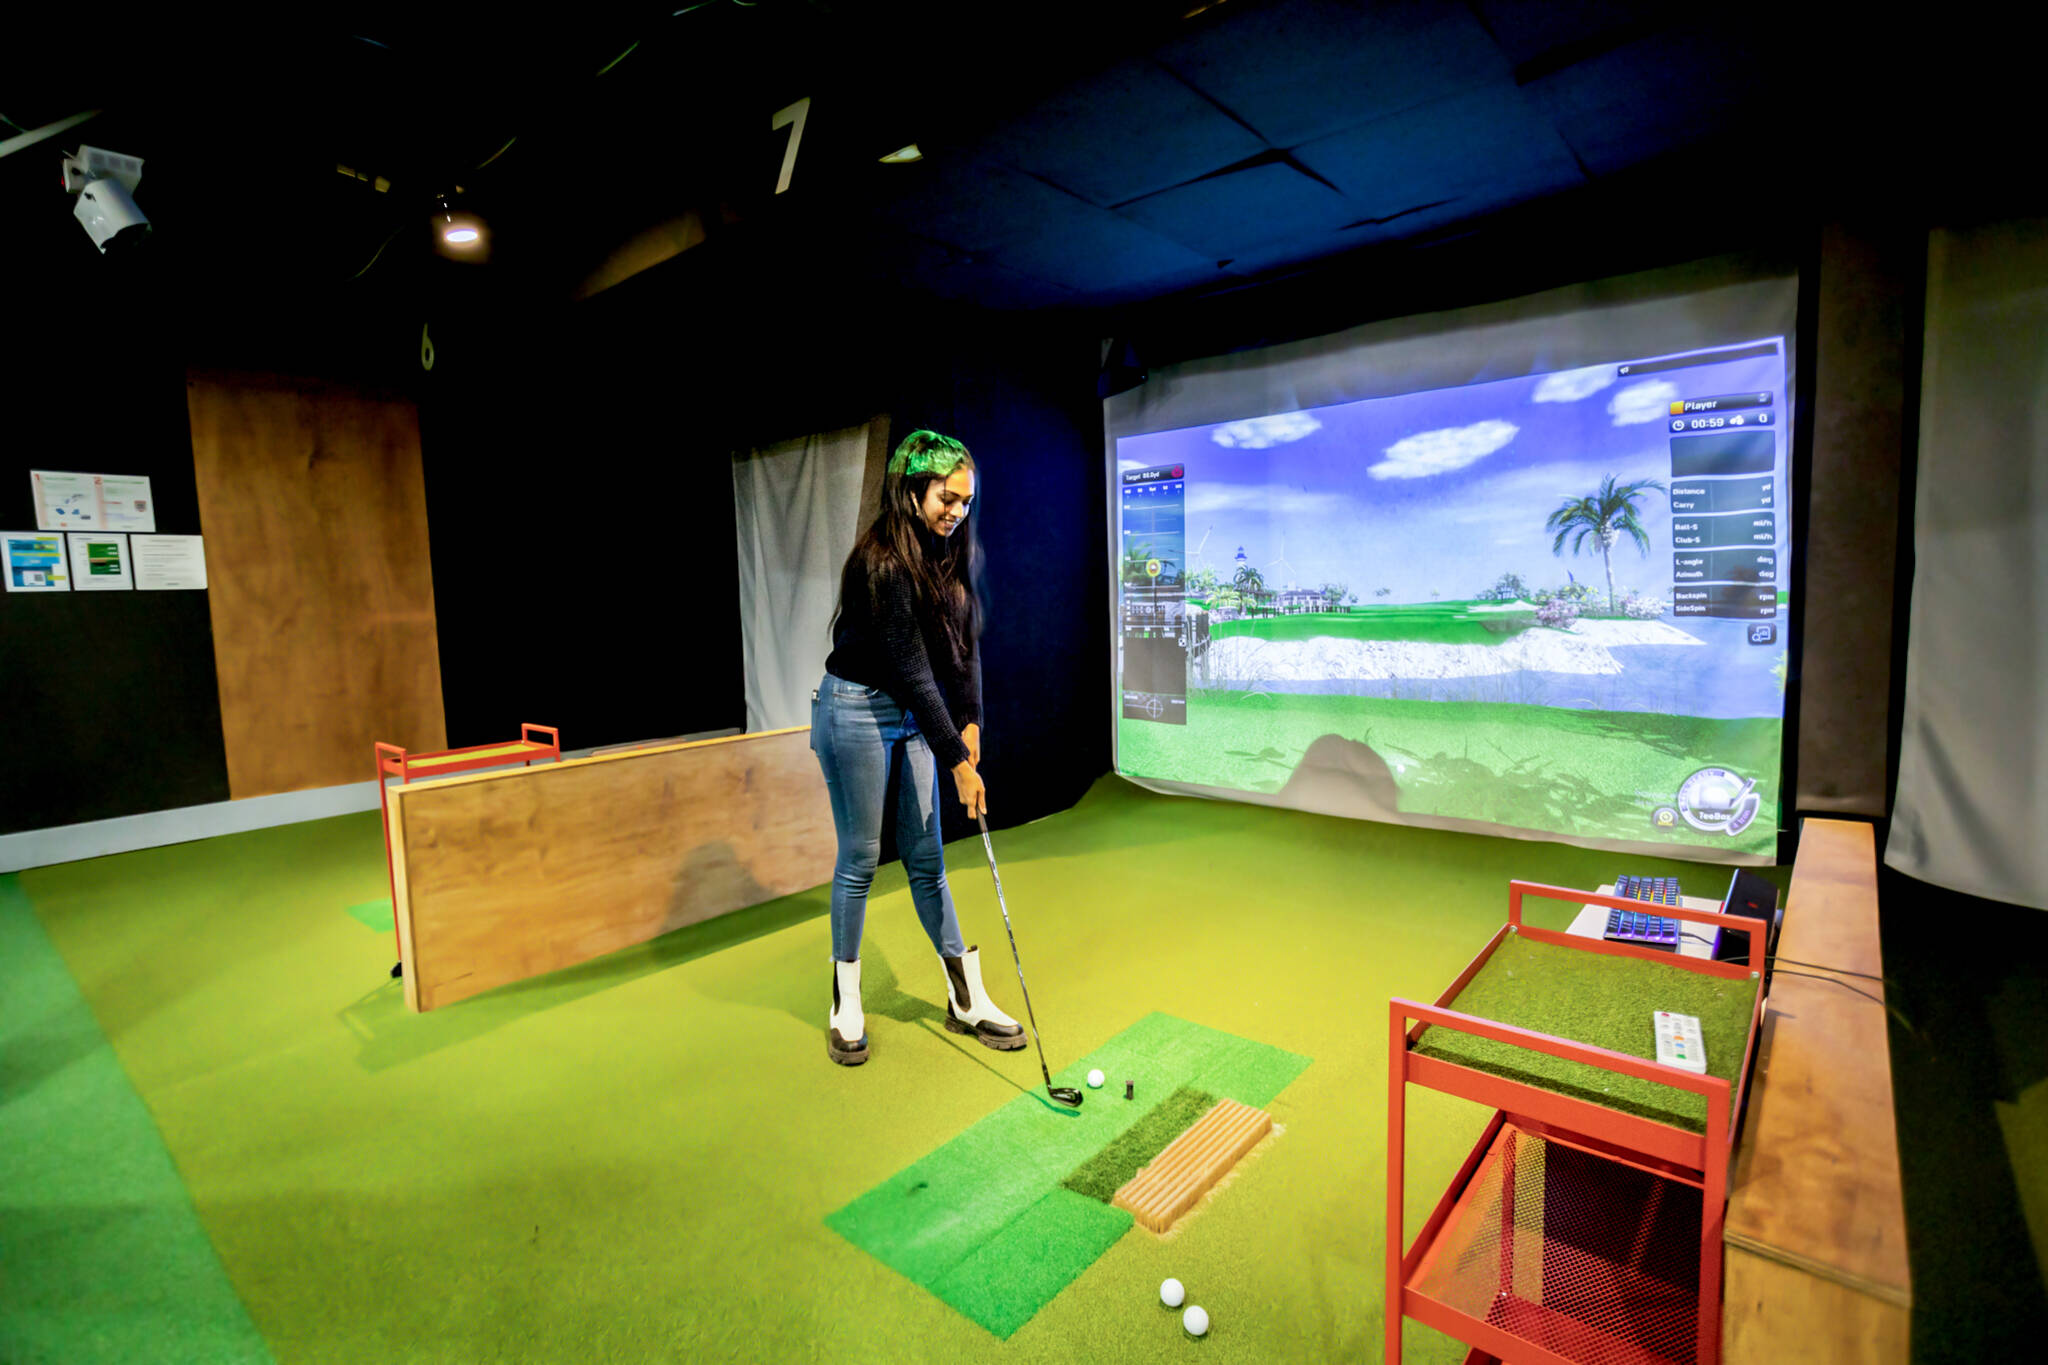 Golf enthusiasts and newbies can practice year-round at Ontario's